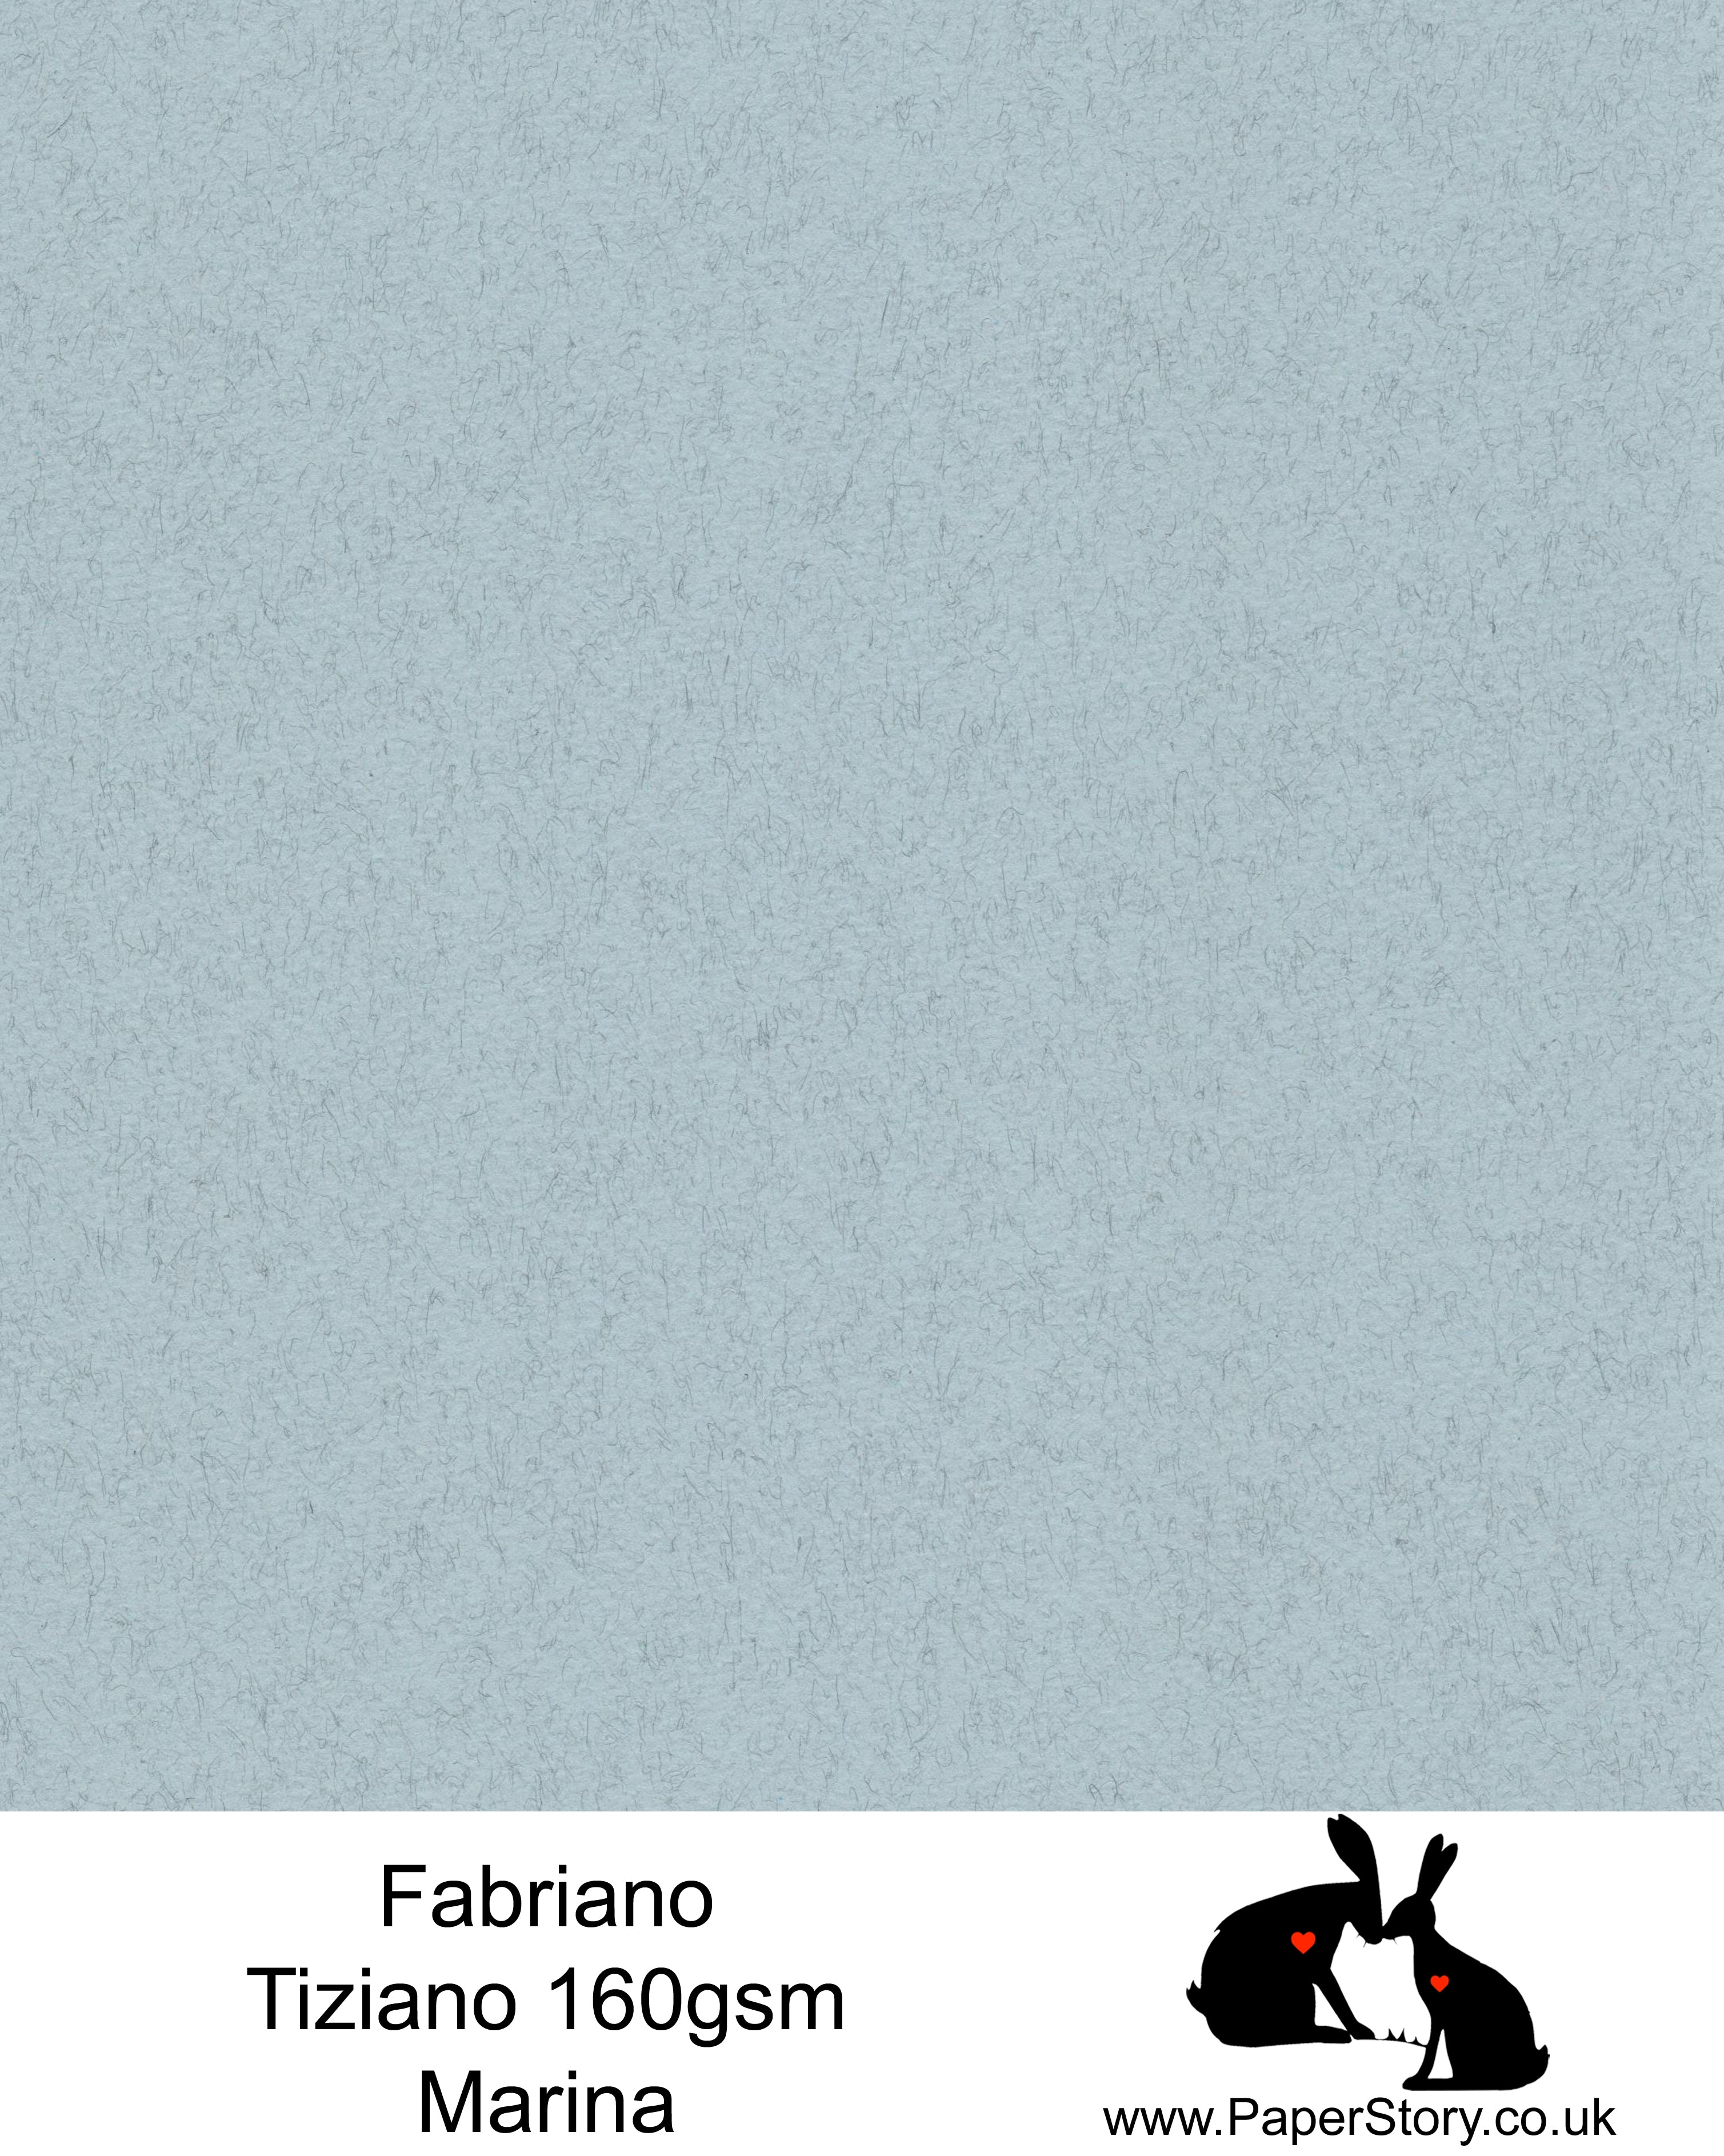 High quality paper from Italy, Marina, felted cool grey with a hint of ocean blue. Fabriano Tiziano is 160 gsm, Tiziano has a high cotton content, a textured naturally sized surface. This paper is acid free to guarantee long permanence in time